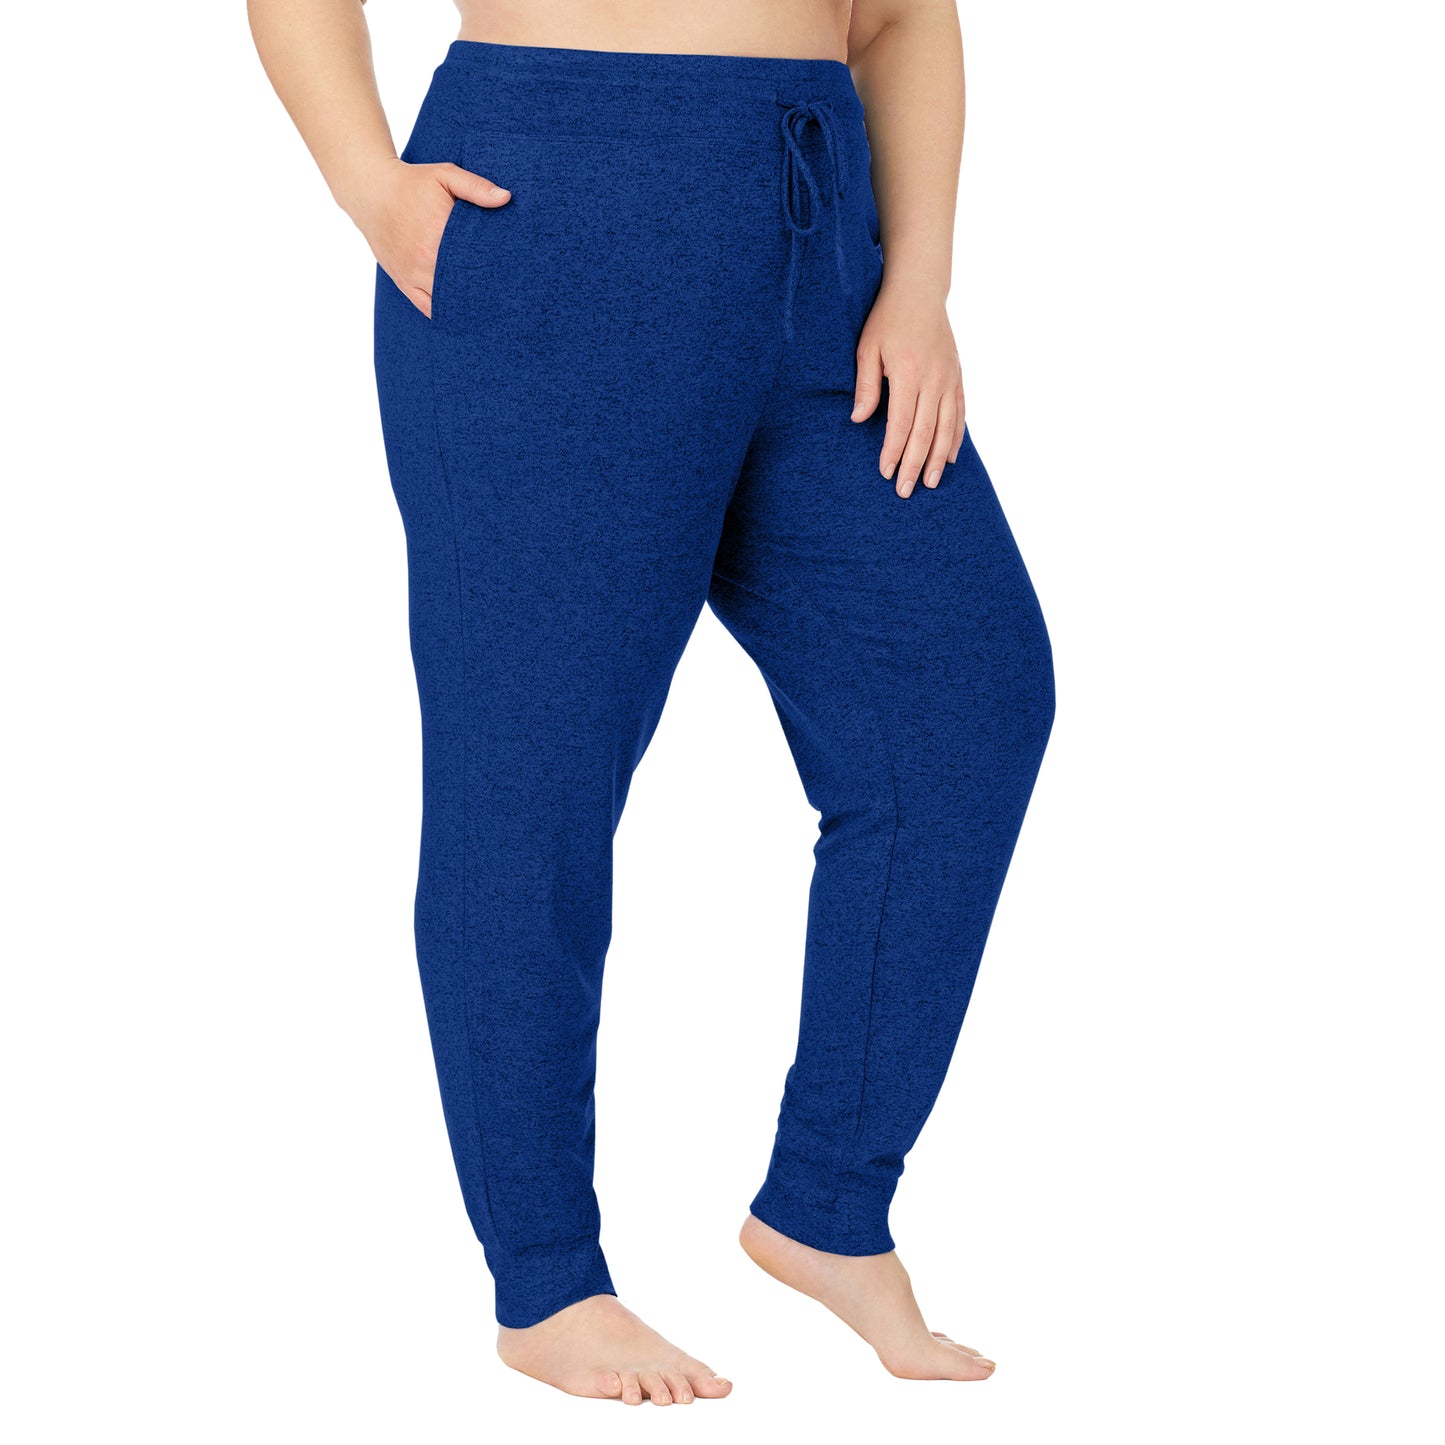 Marled Royal Blue; Model is wearing size 1X. She is 5'9", Bust 38", Waist 36", Hips 48.5". @A lady wearing a marled royal blue jogger plus.